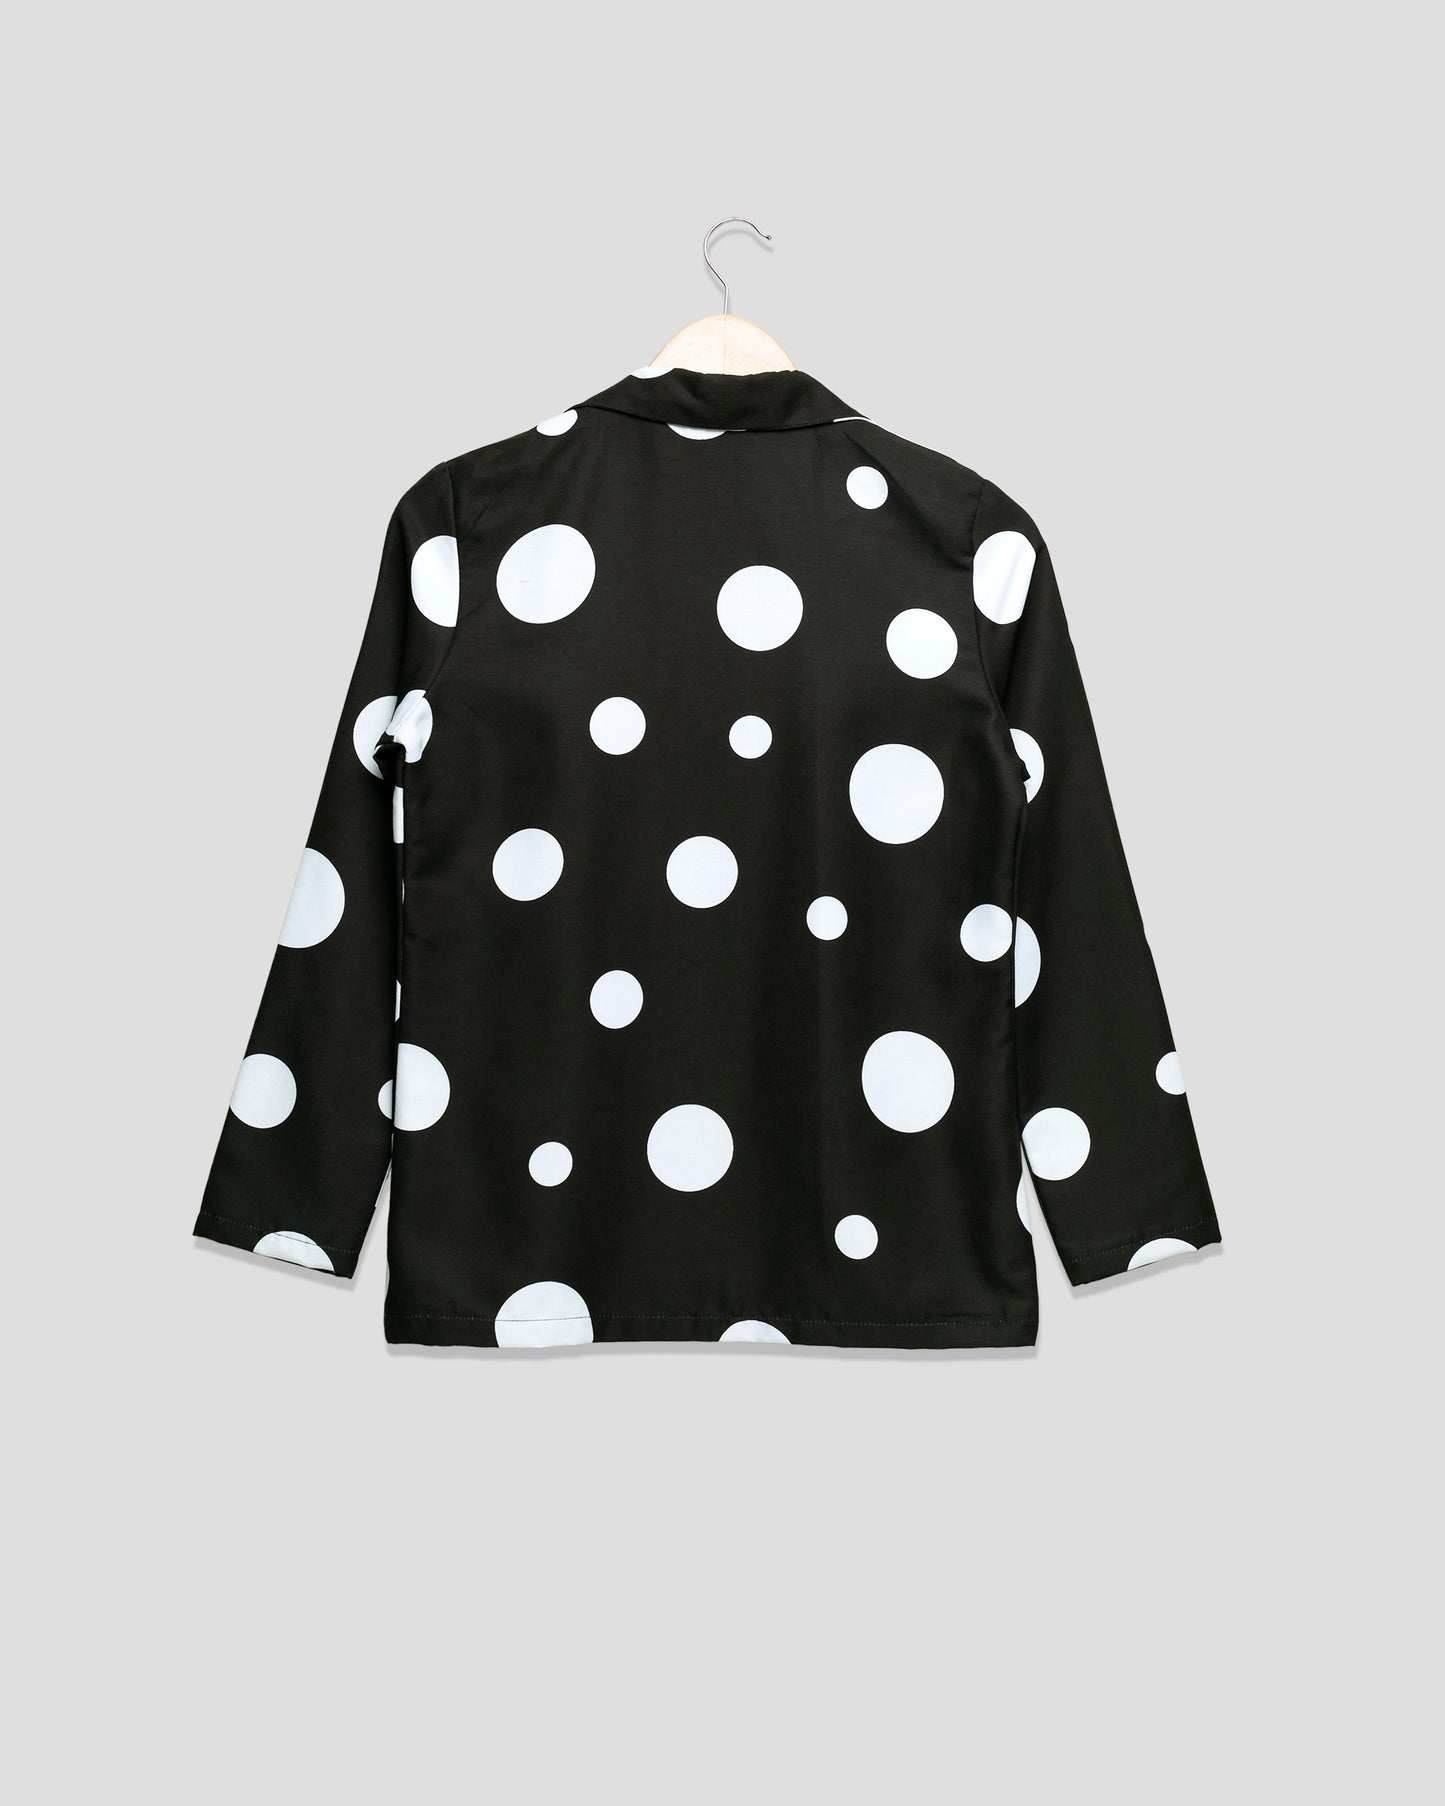 Fabcurate Fashion's High-On-Trend Polka Dots Jacket